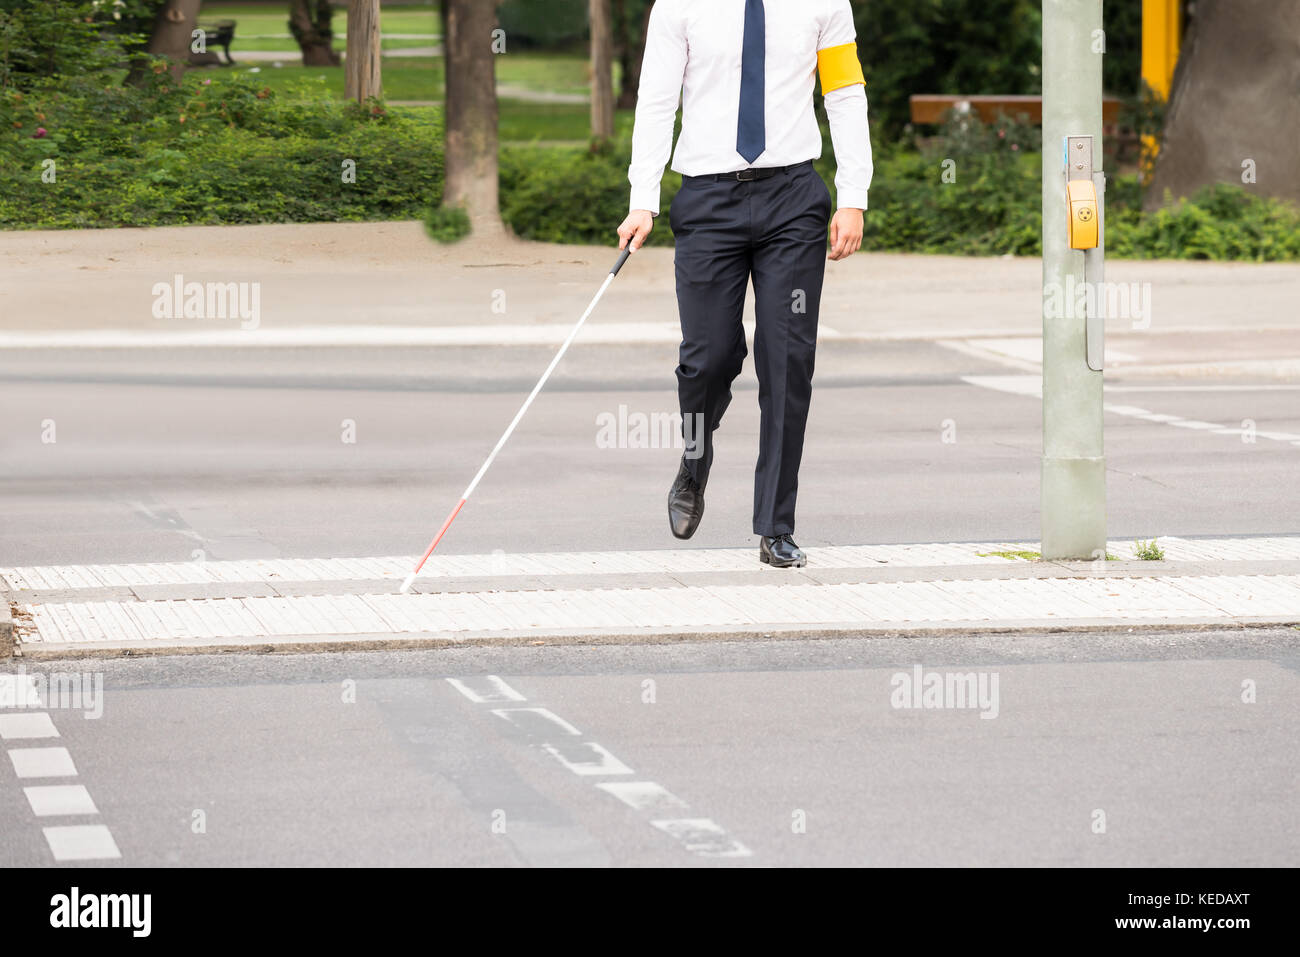 Blind Person With White Stick Walking On Street Stock Photo